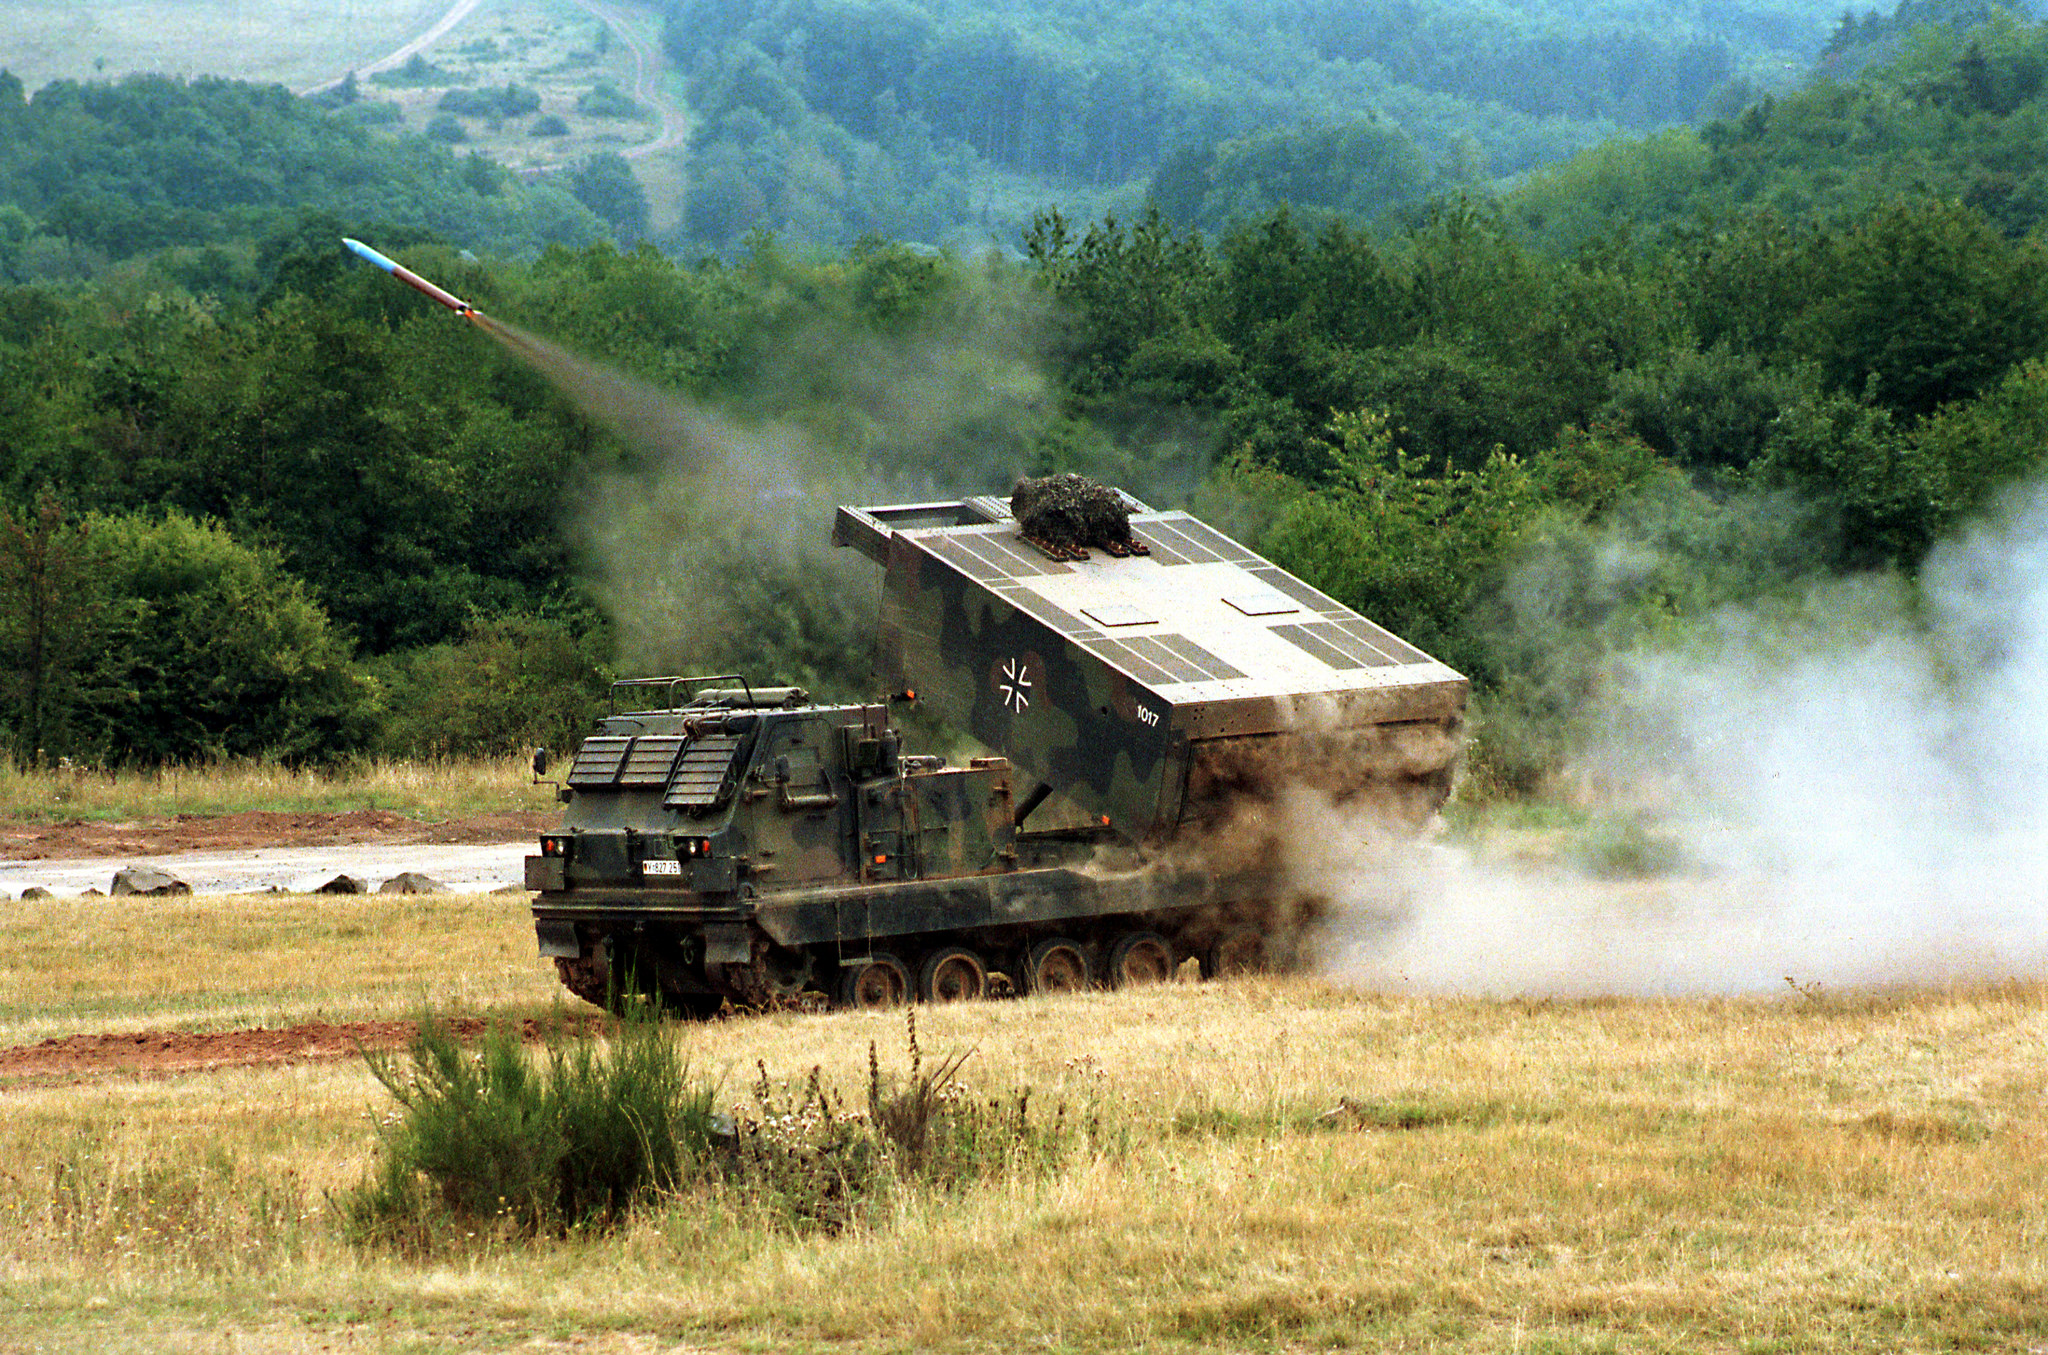 Ukrainian Military are trained to operate HIMARS, MARS II, M270 MLRS and many other vehicles